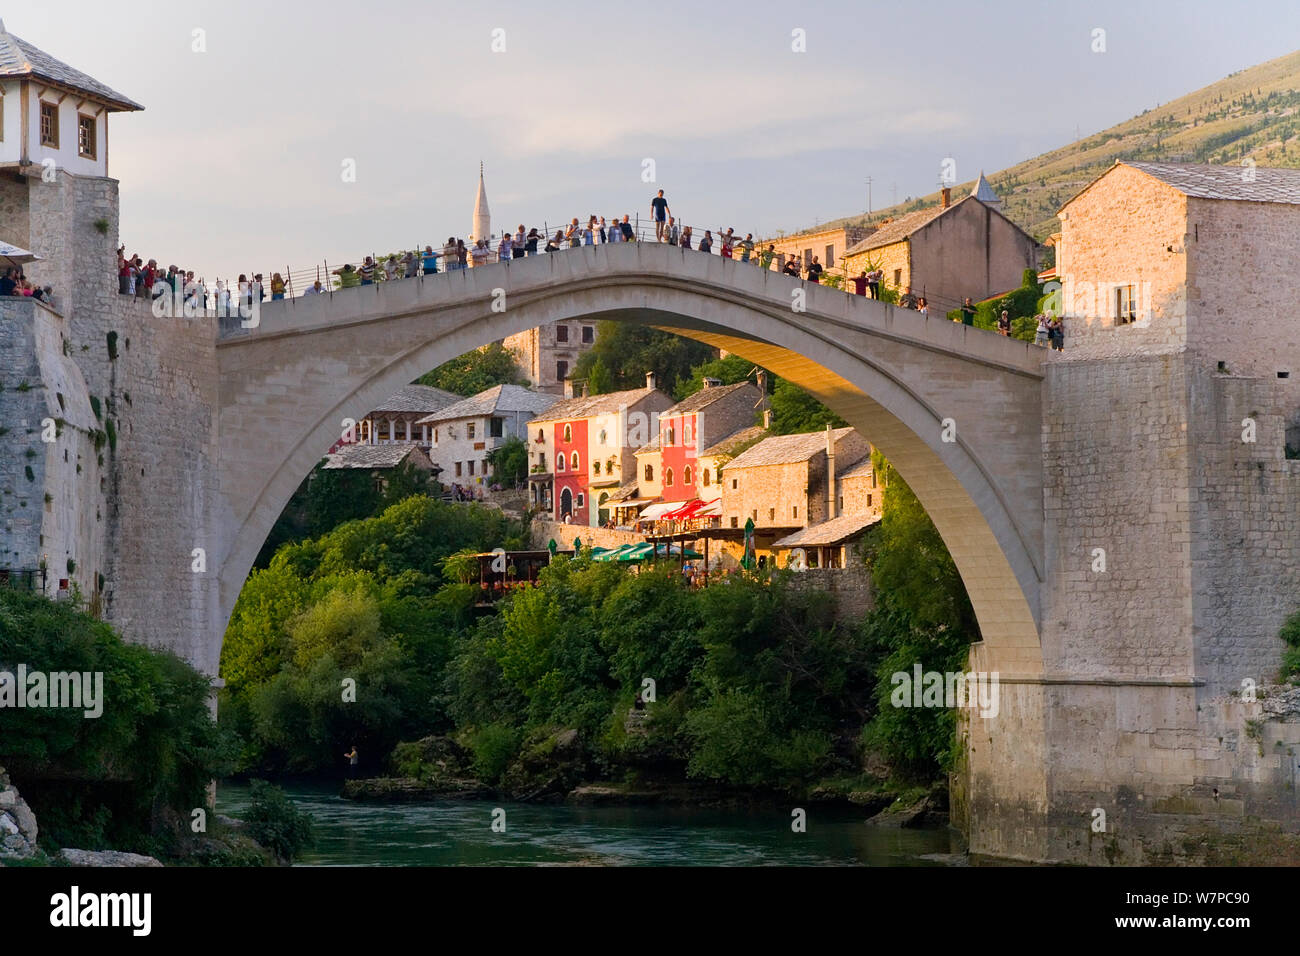 The famous 'Old Bridge' of Mostar built in 1566 was destroyed in 1993, the 'New Old Bridge' as it is known was completed in 2004, Old Town, Mostar, Herzegovina, Bosnia and Herzegovina, Balkans, 2007 Stock Photo